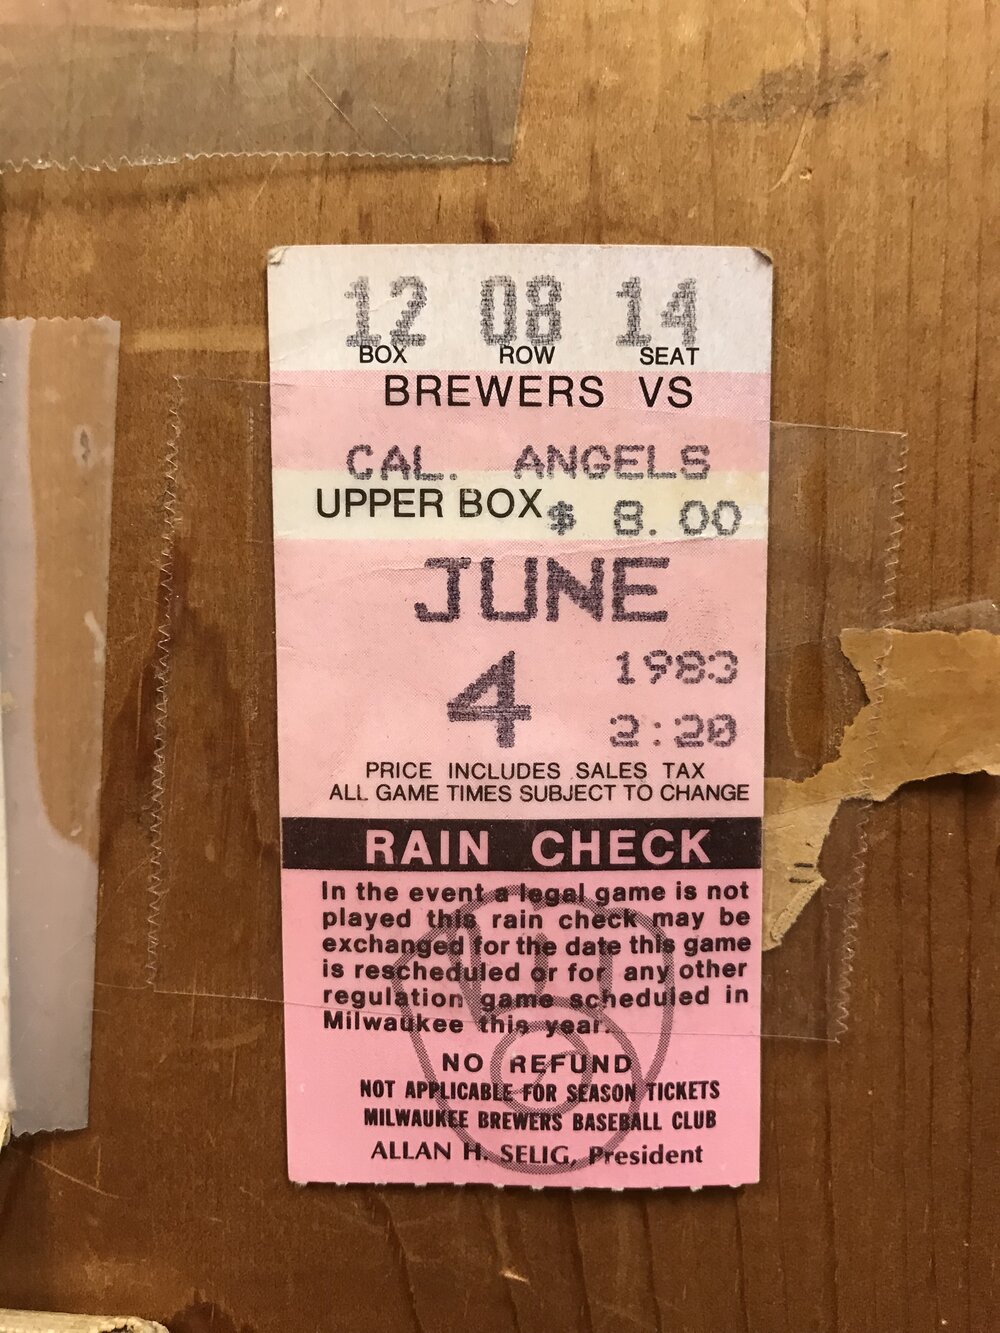  I  looked this one up : looks like it was the 1988 game where the Brewers beat the Angels, 1-0.  Saturday, June 4, 1988  Start Time: 8:09 p.m. Local   Attendance : 43,287   Venue : County Stadium   Game Duration : 1:59  Night Game, on grass 